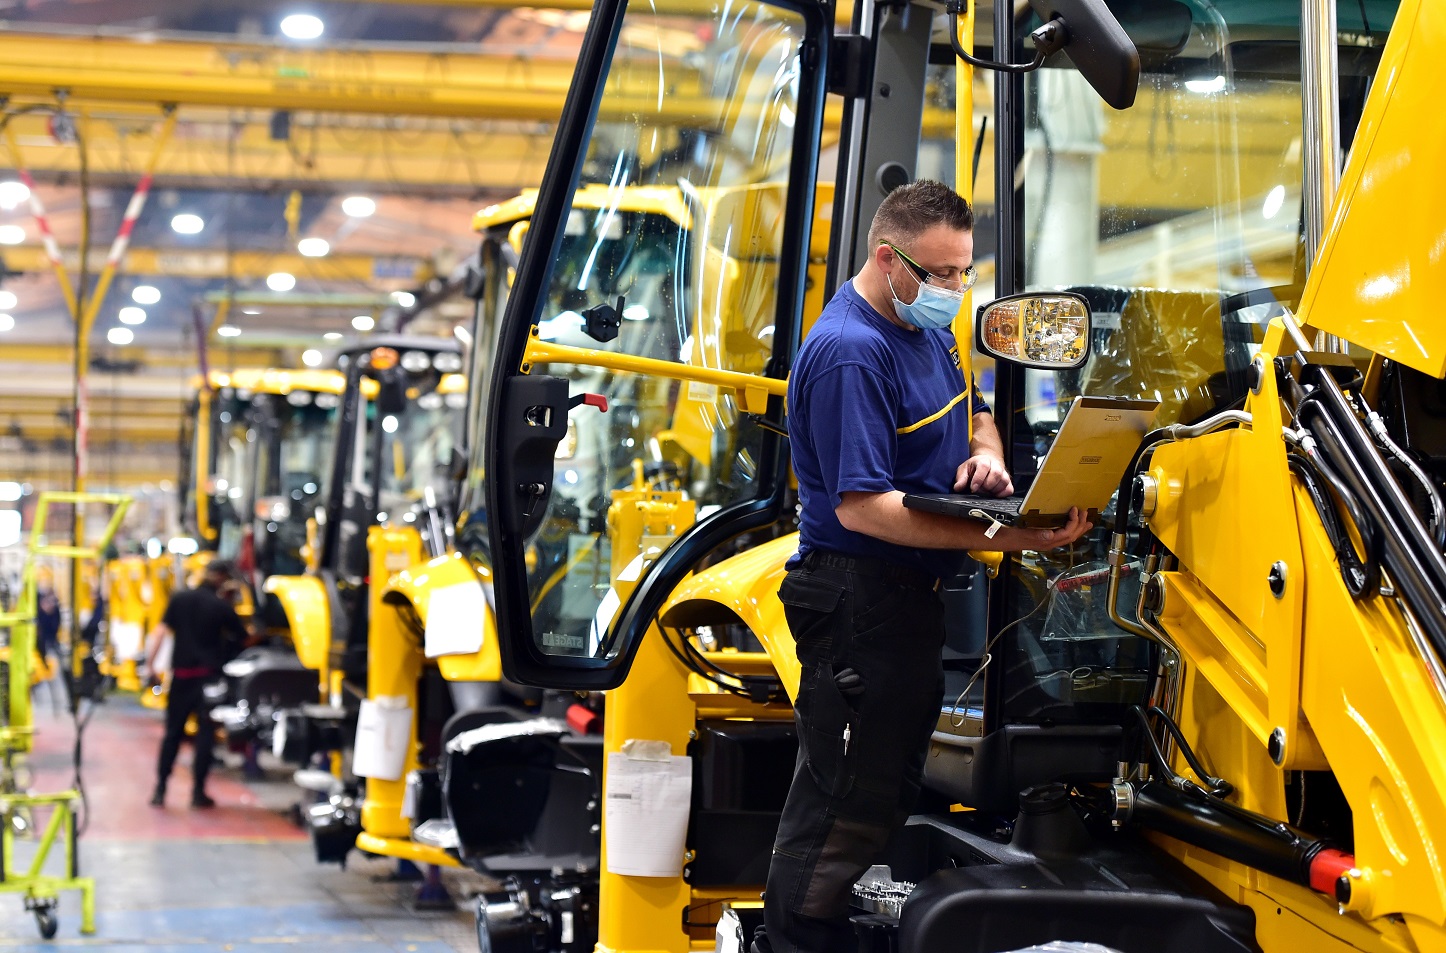 JCB says there is record demand for its construction and agricultural products